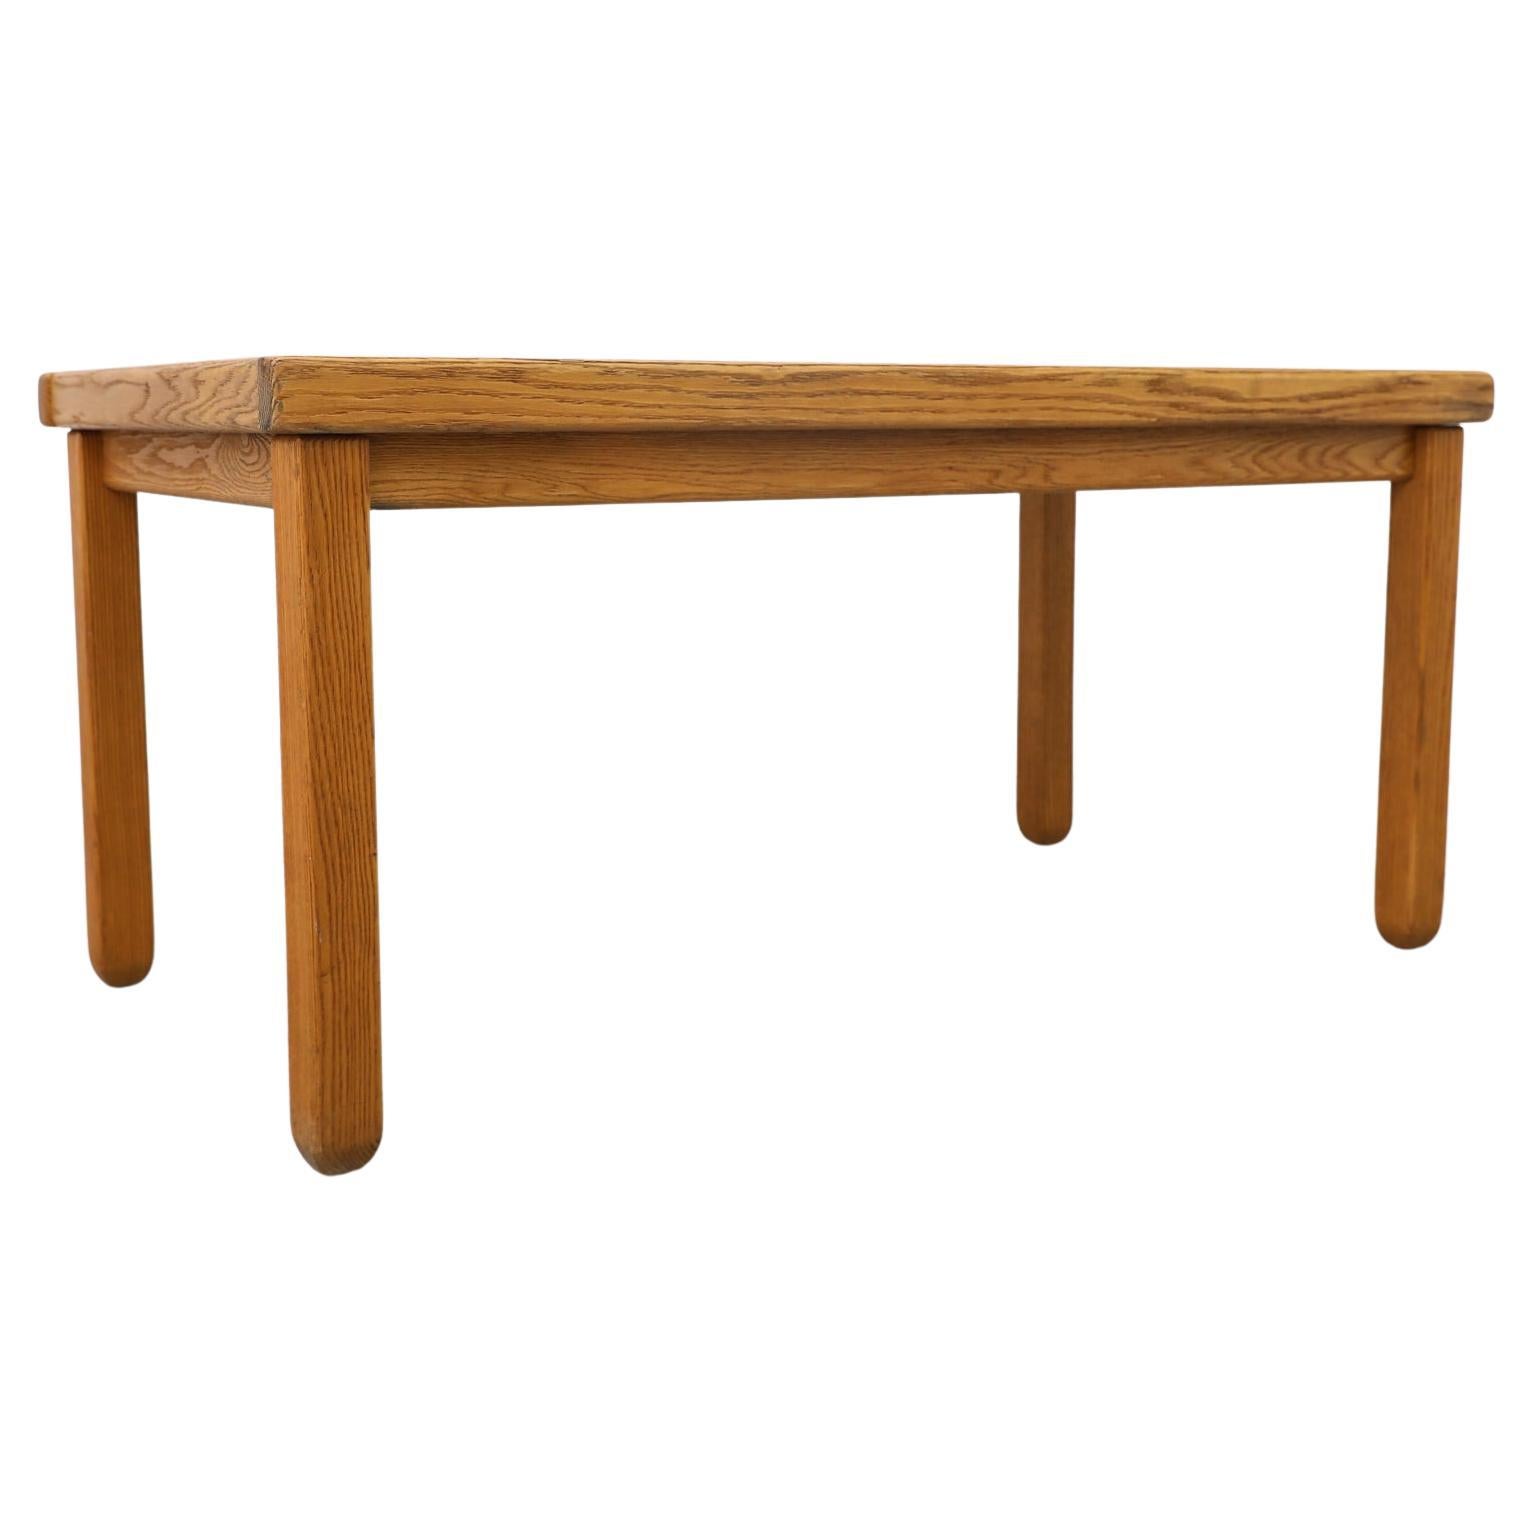 Brutalist Belgian Slatted Oak Dining Table w/ Rounded Legs Attributed to DePuydt